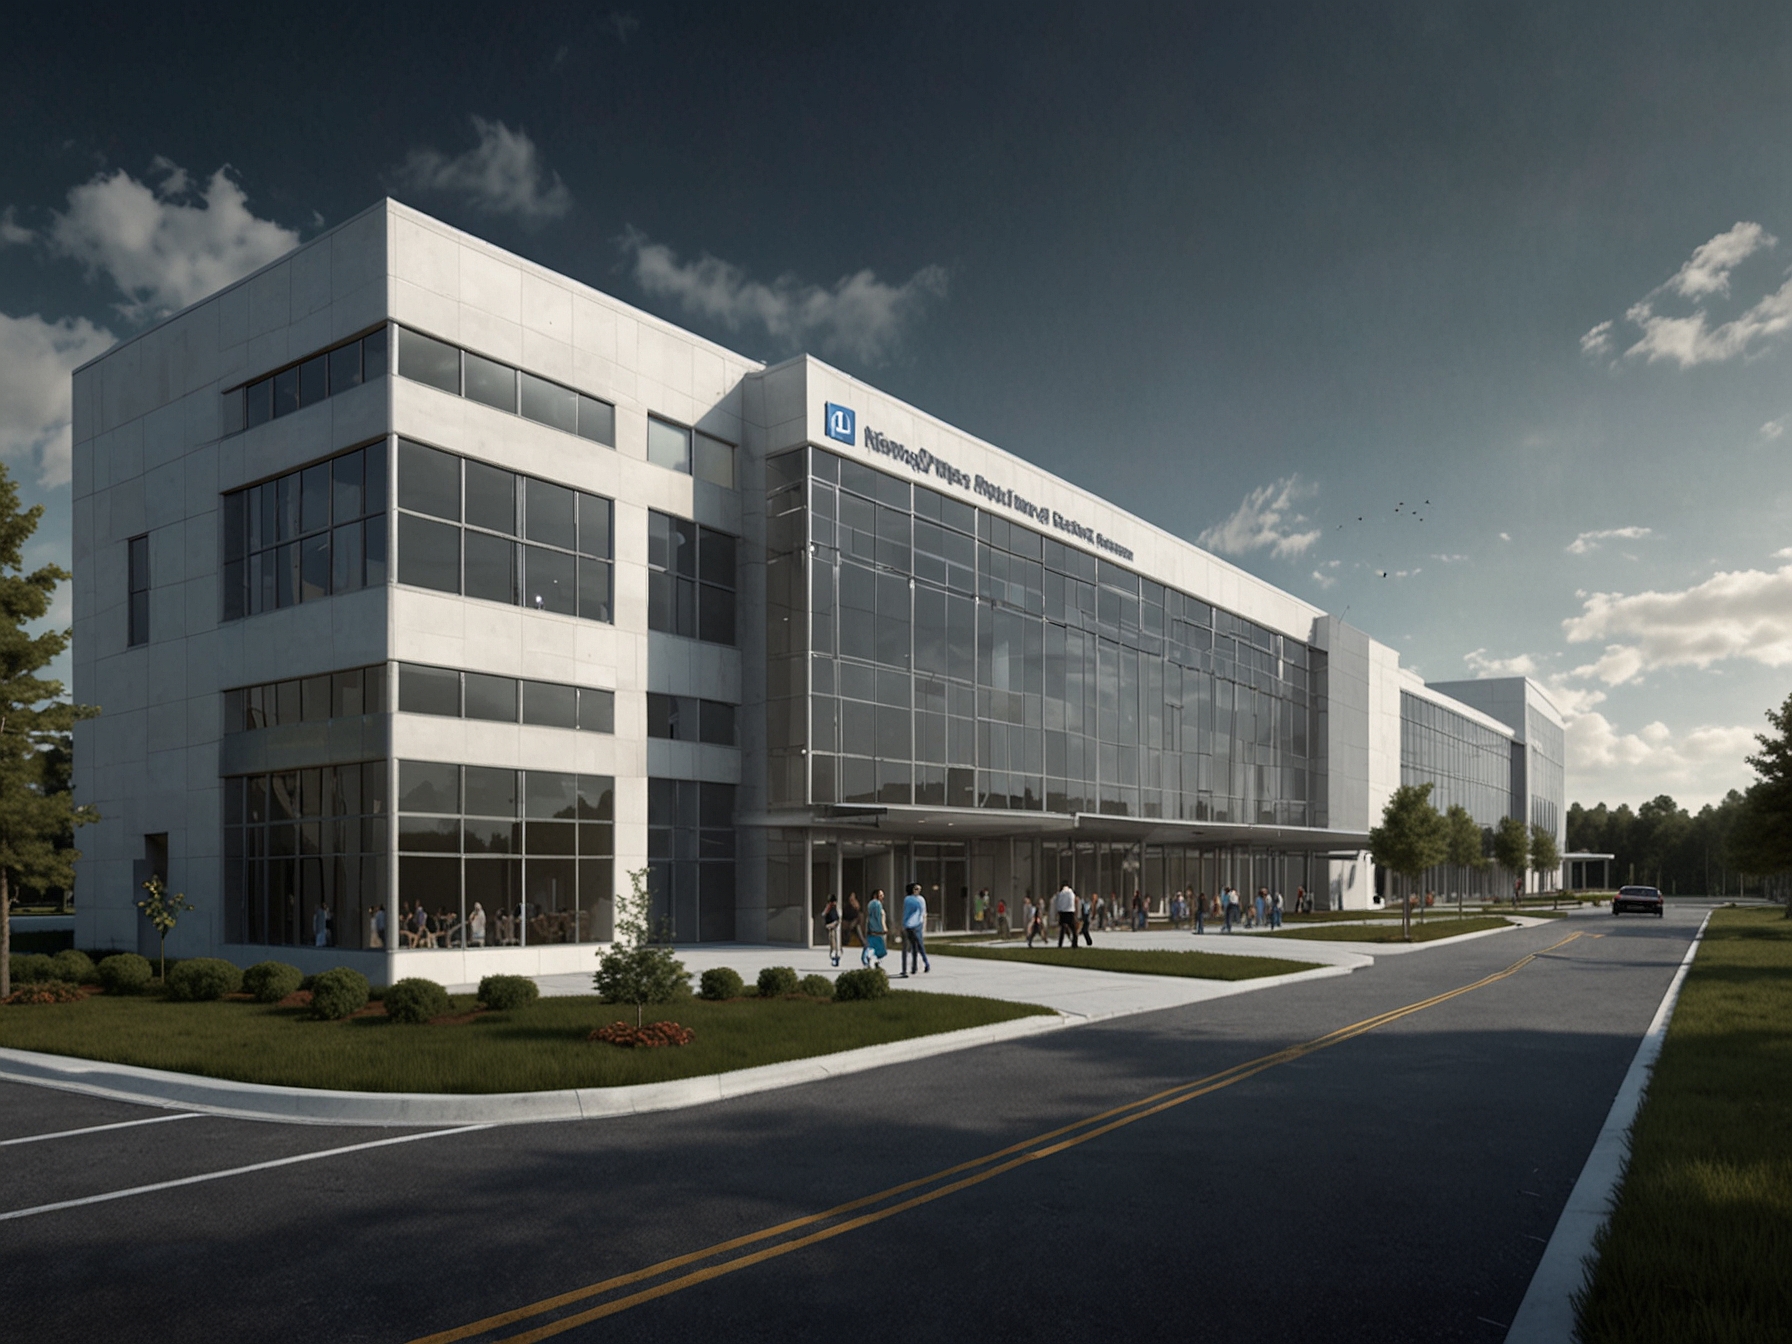 An architectural rendering of Novo Nordisk's planned manufacturing facility in Clayton, North Carolina, highlighting its state-of-the-art design and expansive production areas.